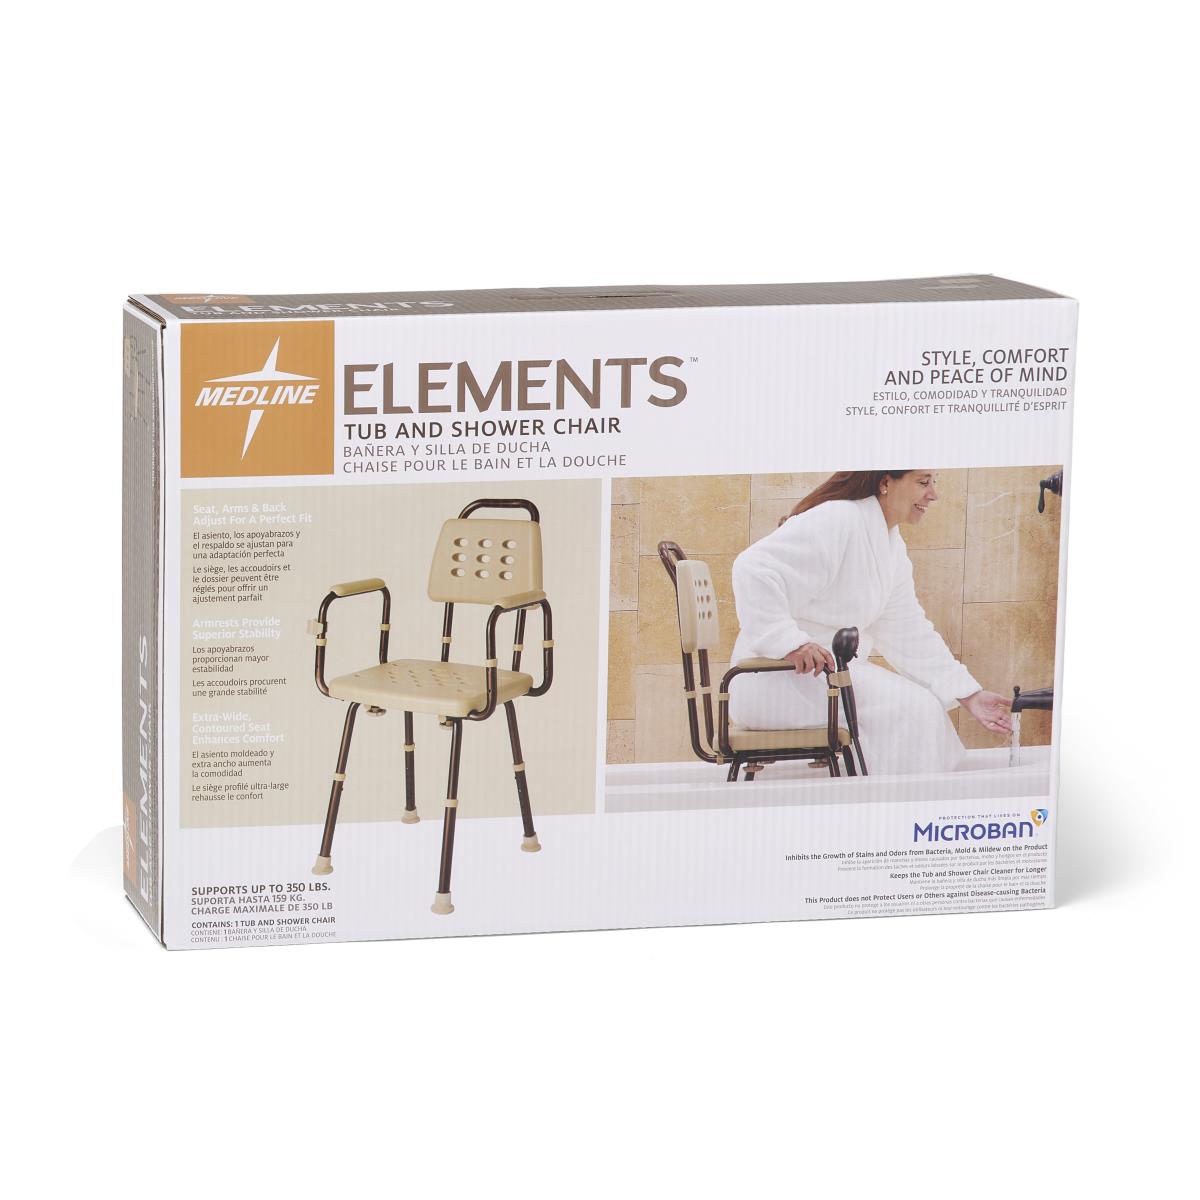 Shower Chairs with Microban